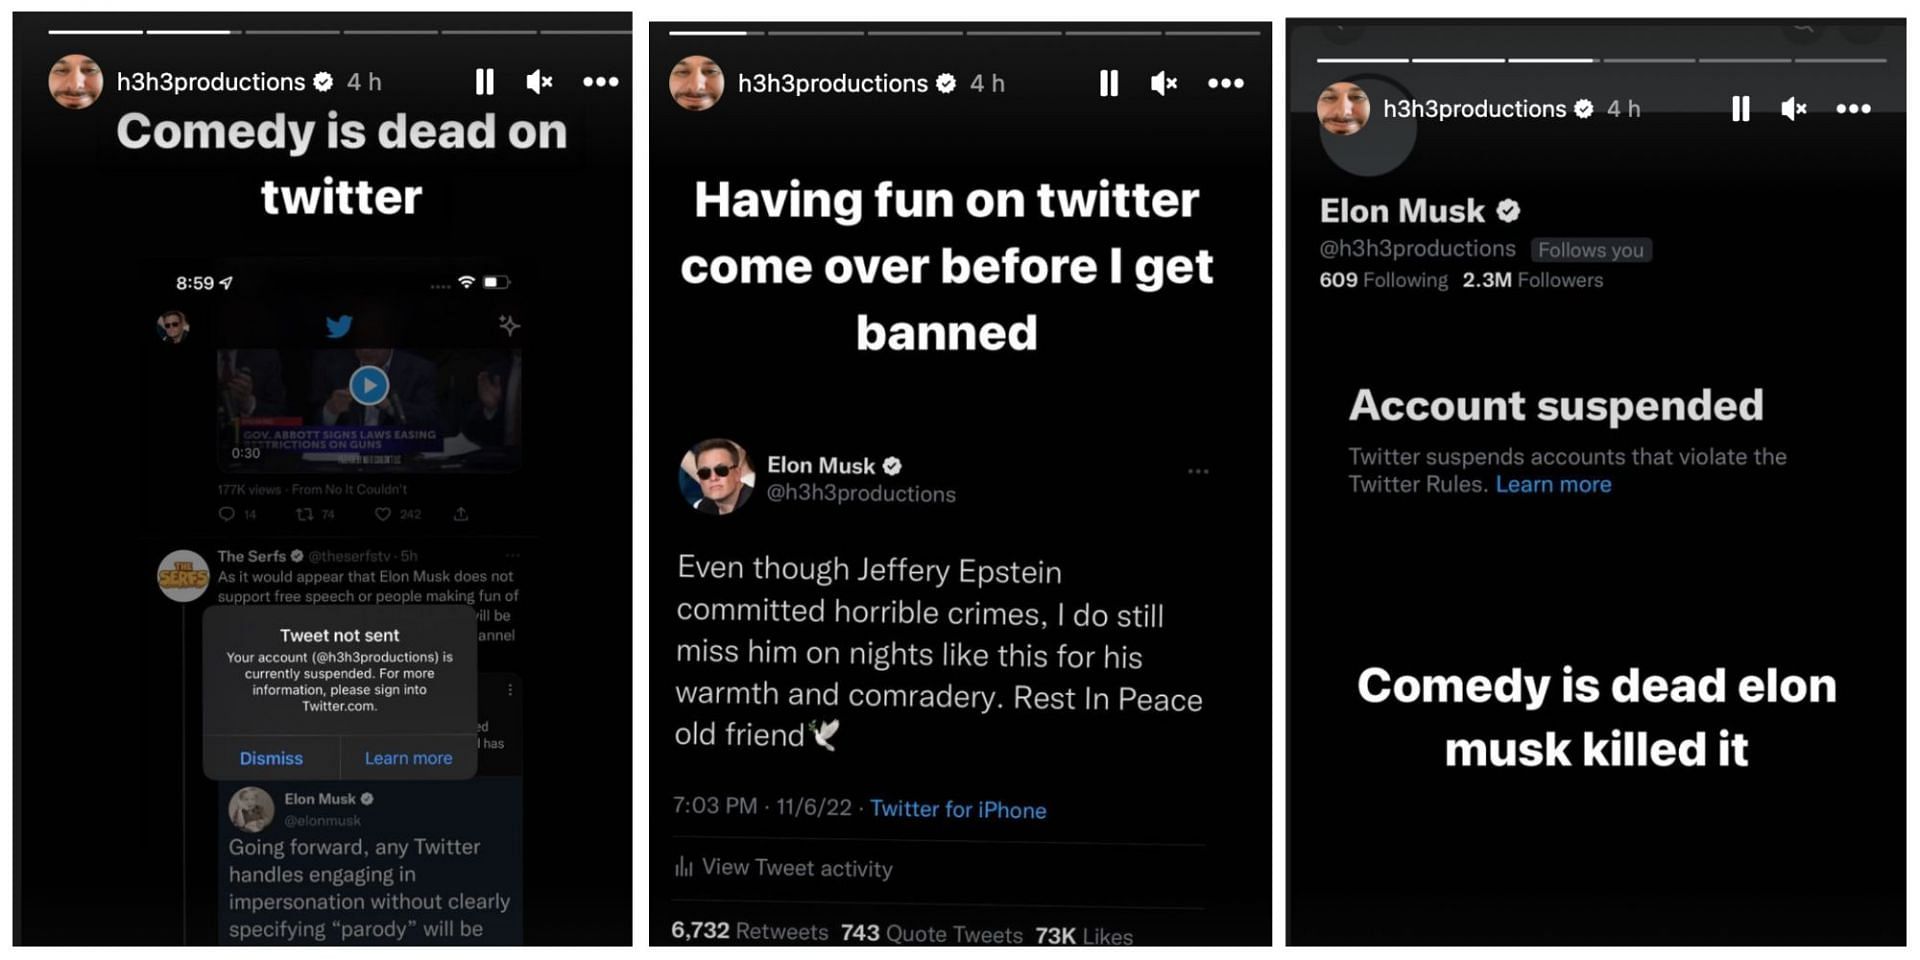 Klein claims that Elon has killed comedy on Twitter after the frequent bans on comedians and parody accounts. (Image via Twitter)